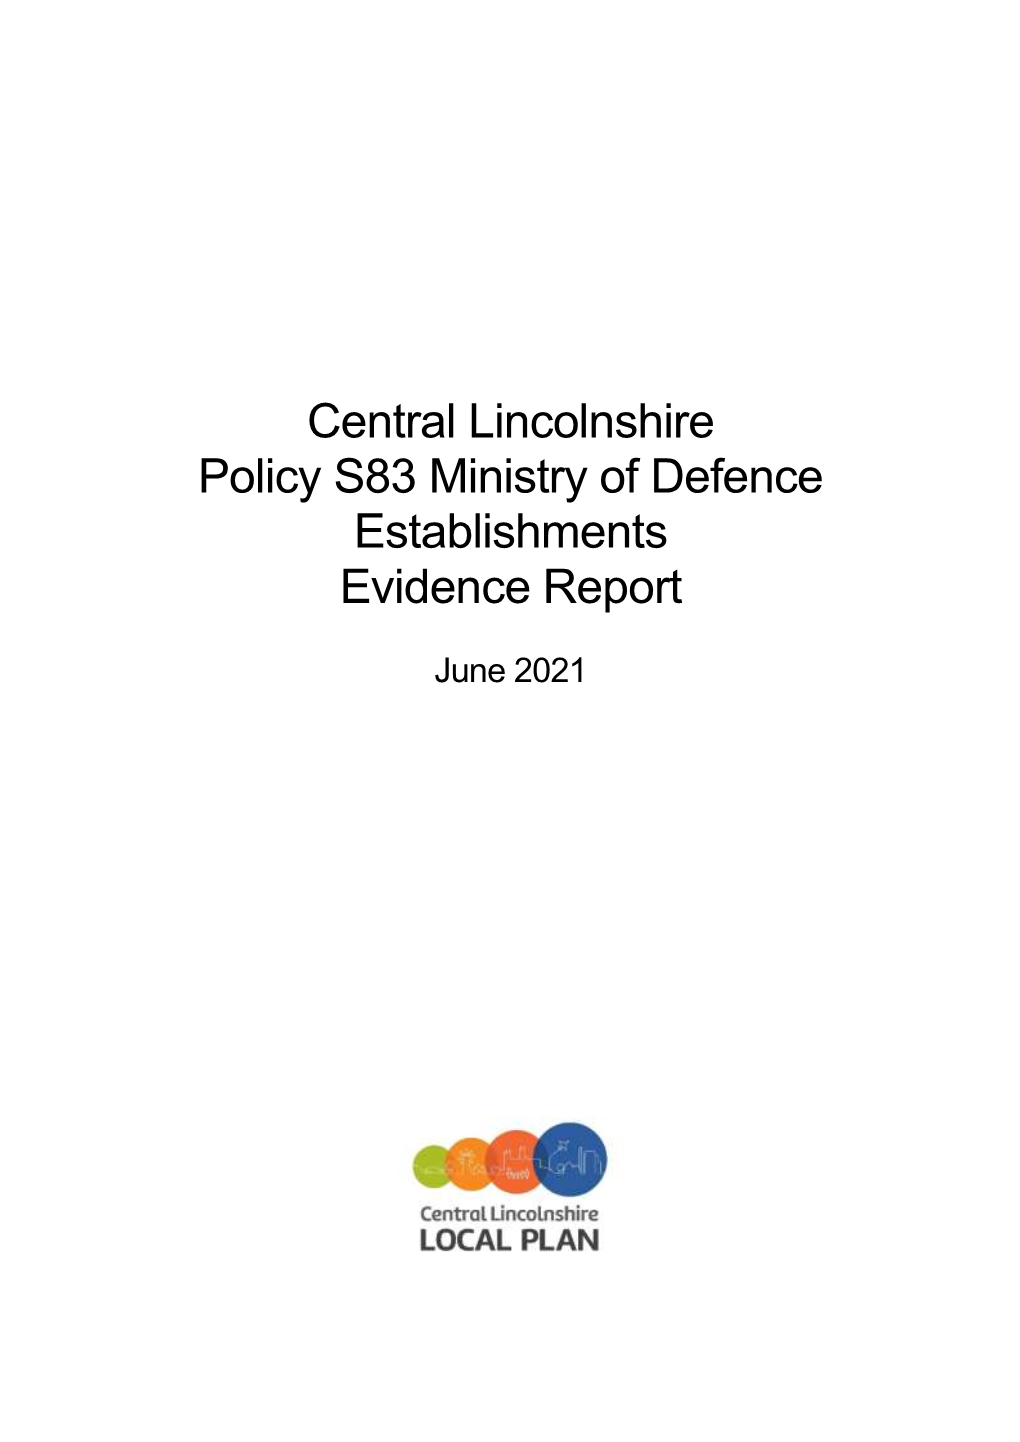 Central Lincolnshire Policy S83 Ministry of Defence Establishments Evidence Report